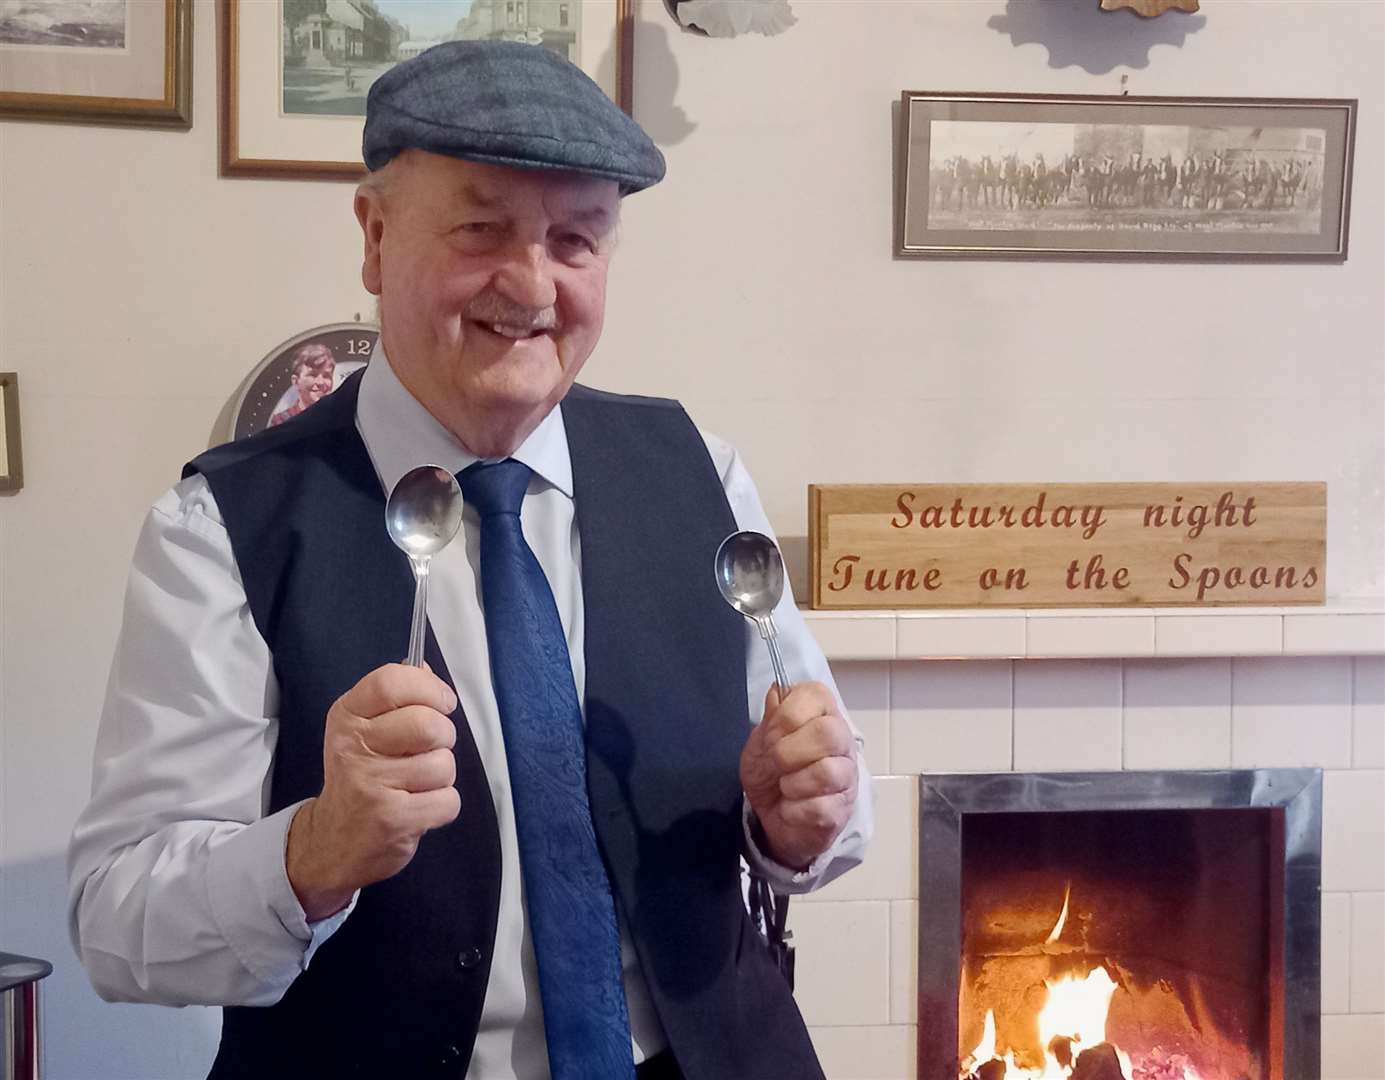 Willie Mackay is preparing for this weekend's musical session which will be his 150th Saturday night Tunes on the Spoons.